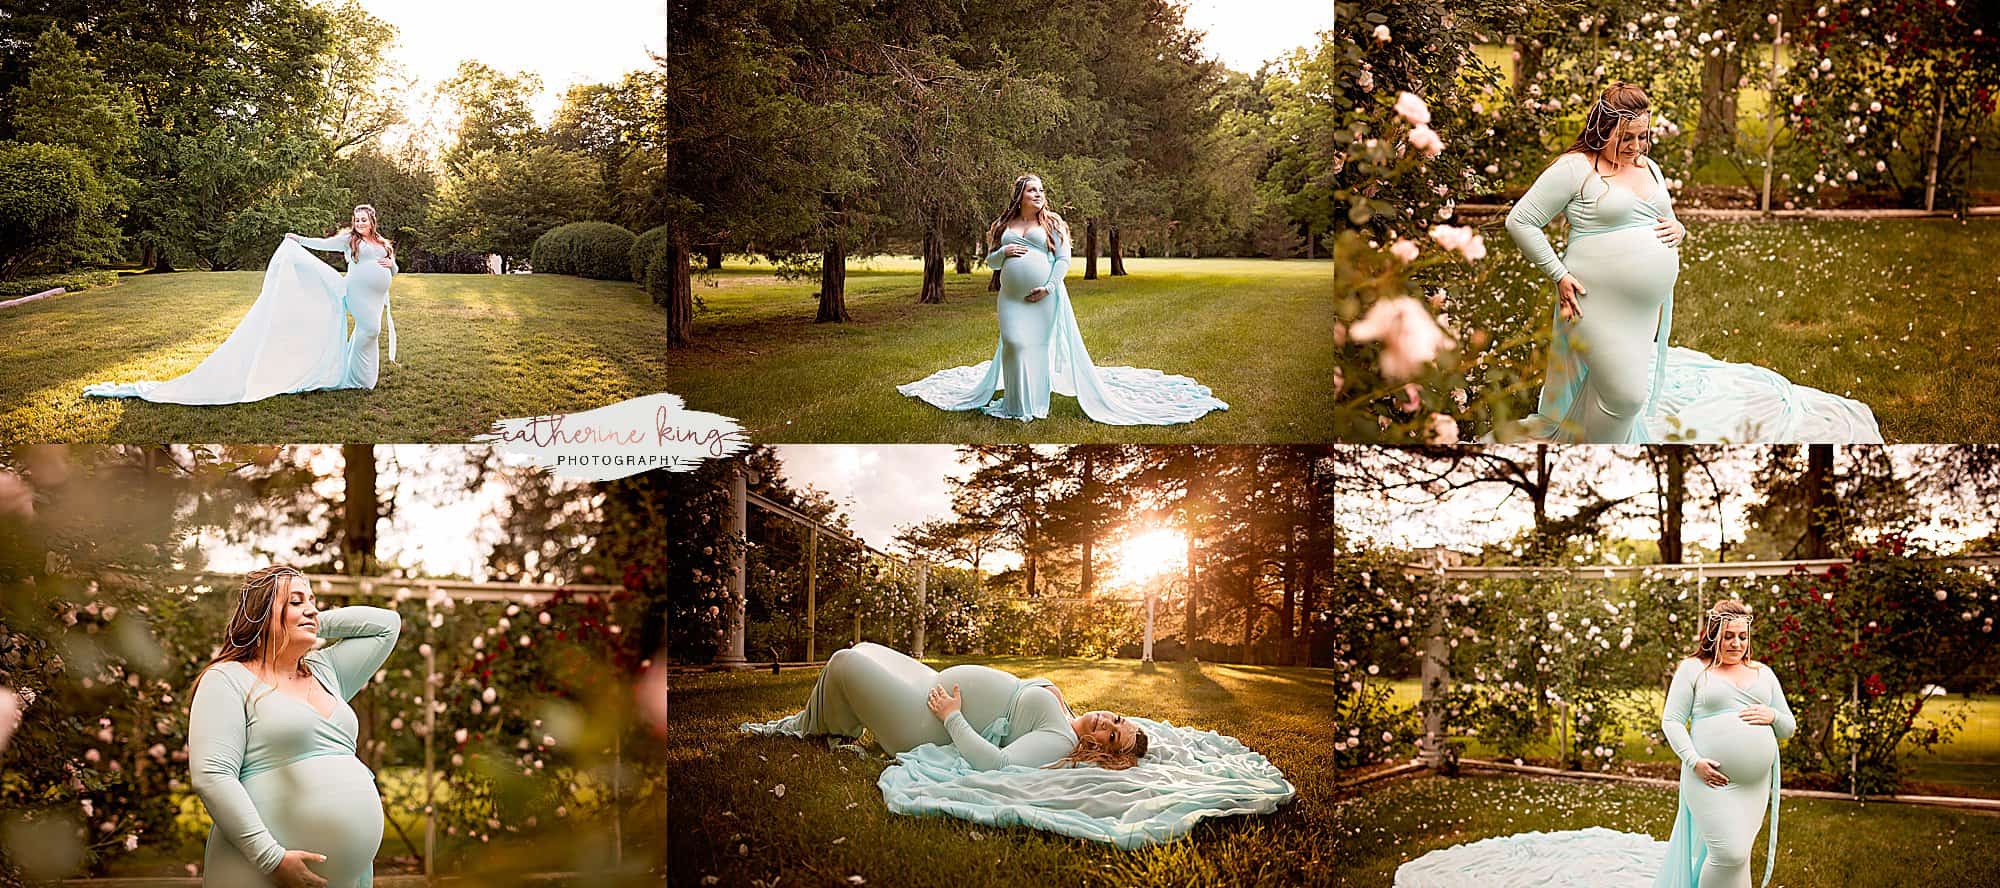 Stunning sunset maternity session at The Wadsworth Mansion in Middletown CT